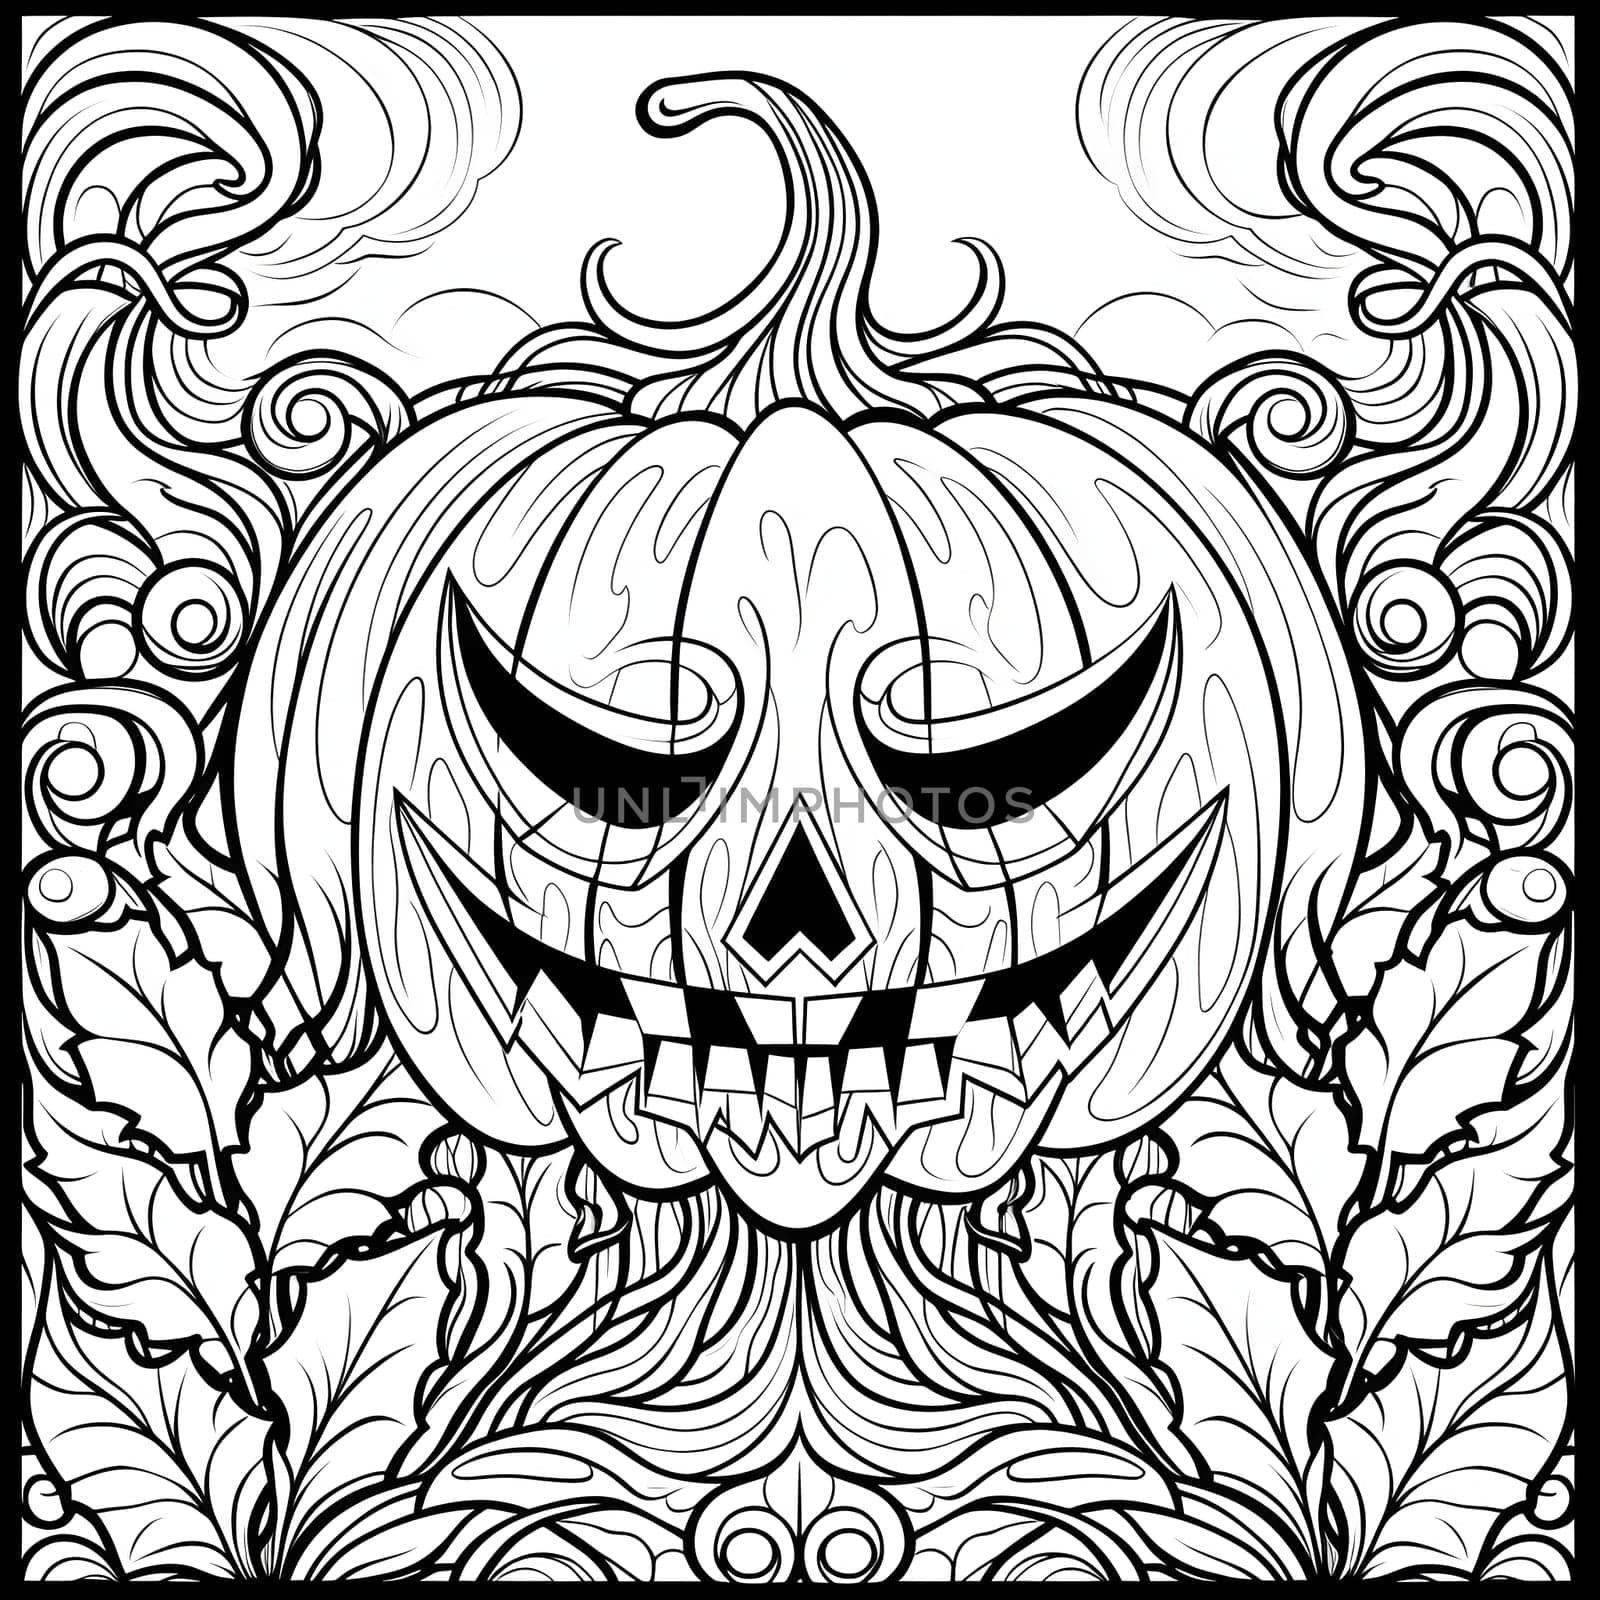 Dark jack-o-lantern pumpkin and surrounding vines and leaves, Halloween black and white picture coloring book. by ThemesS